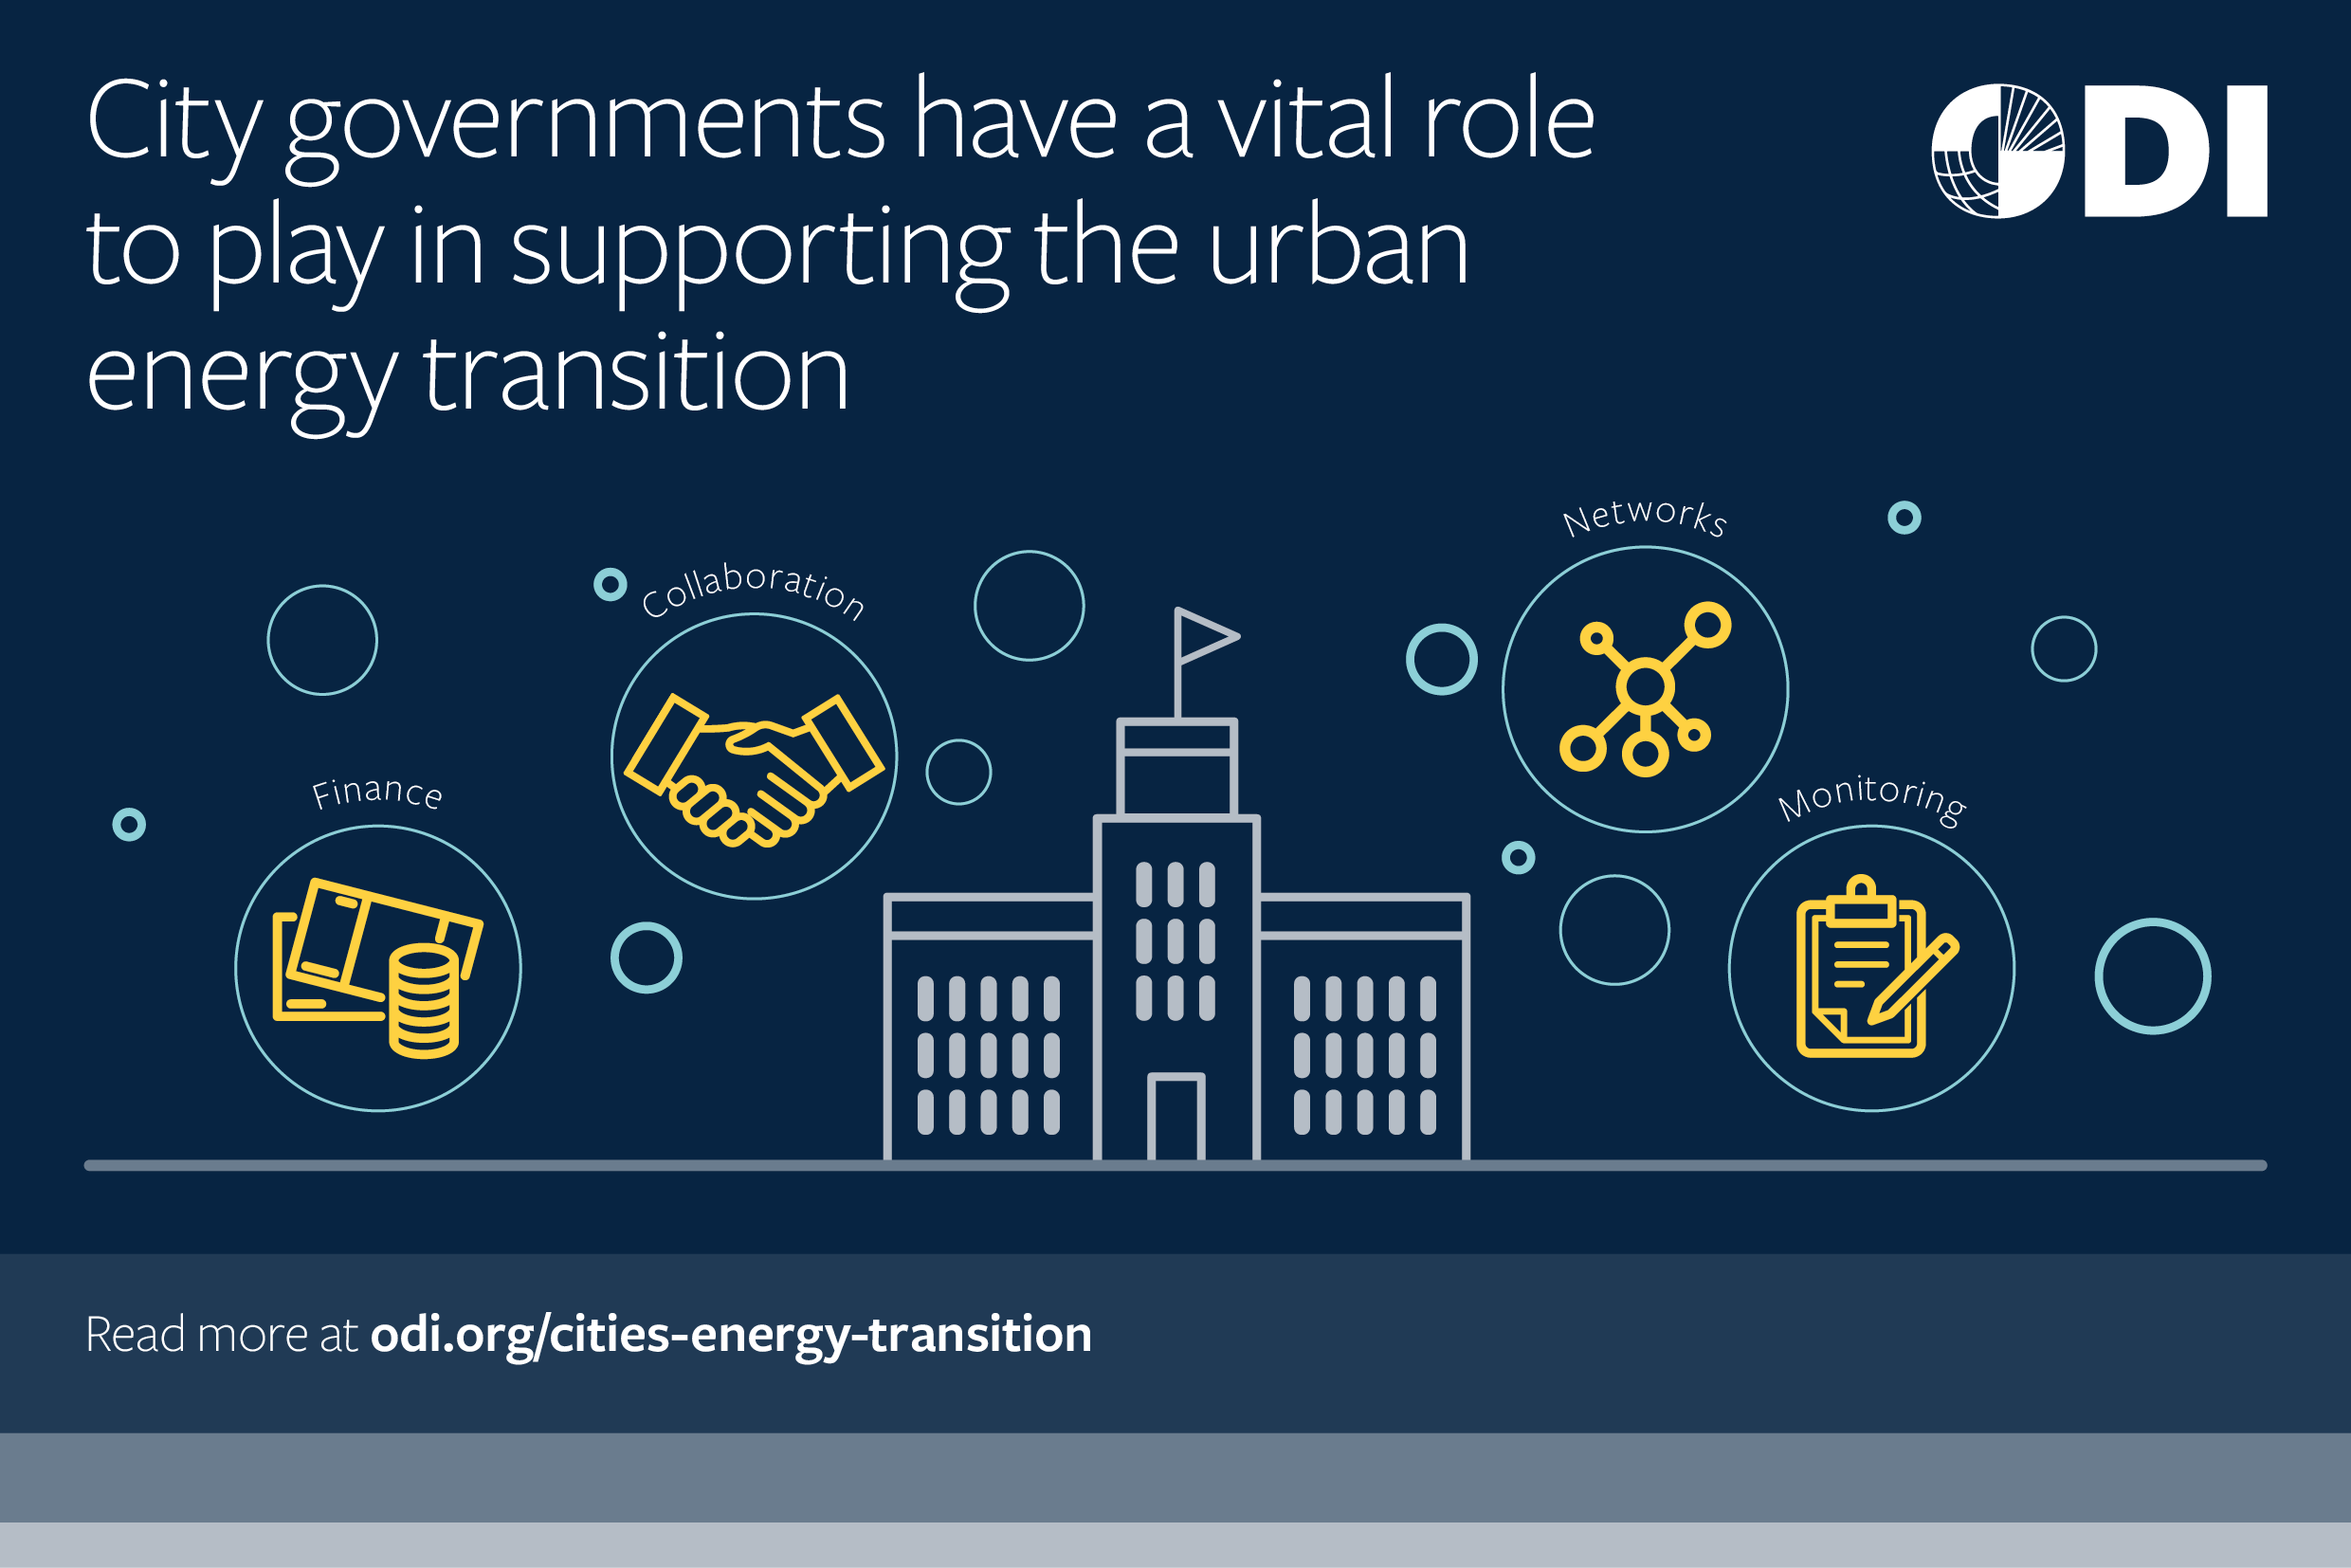 City governments have a vital role to play in supporting the urban energy transition.